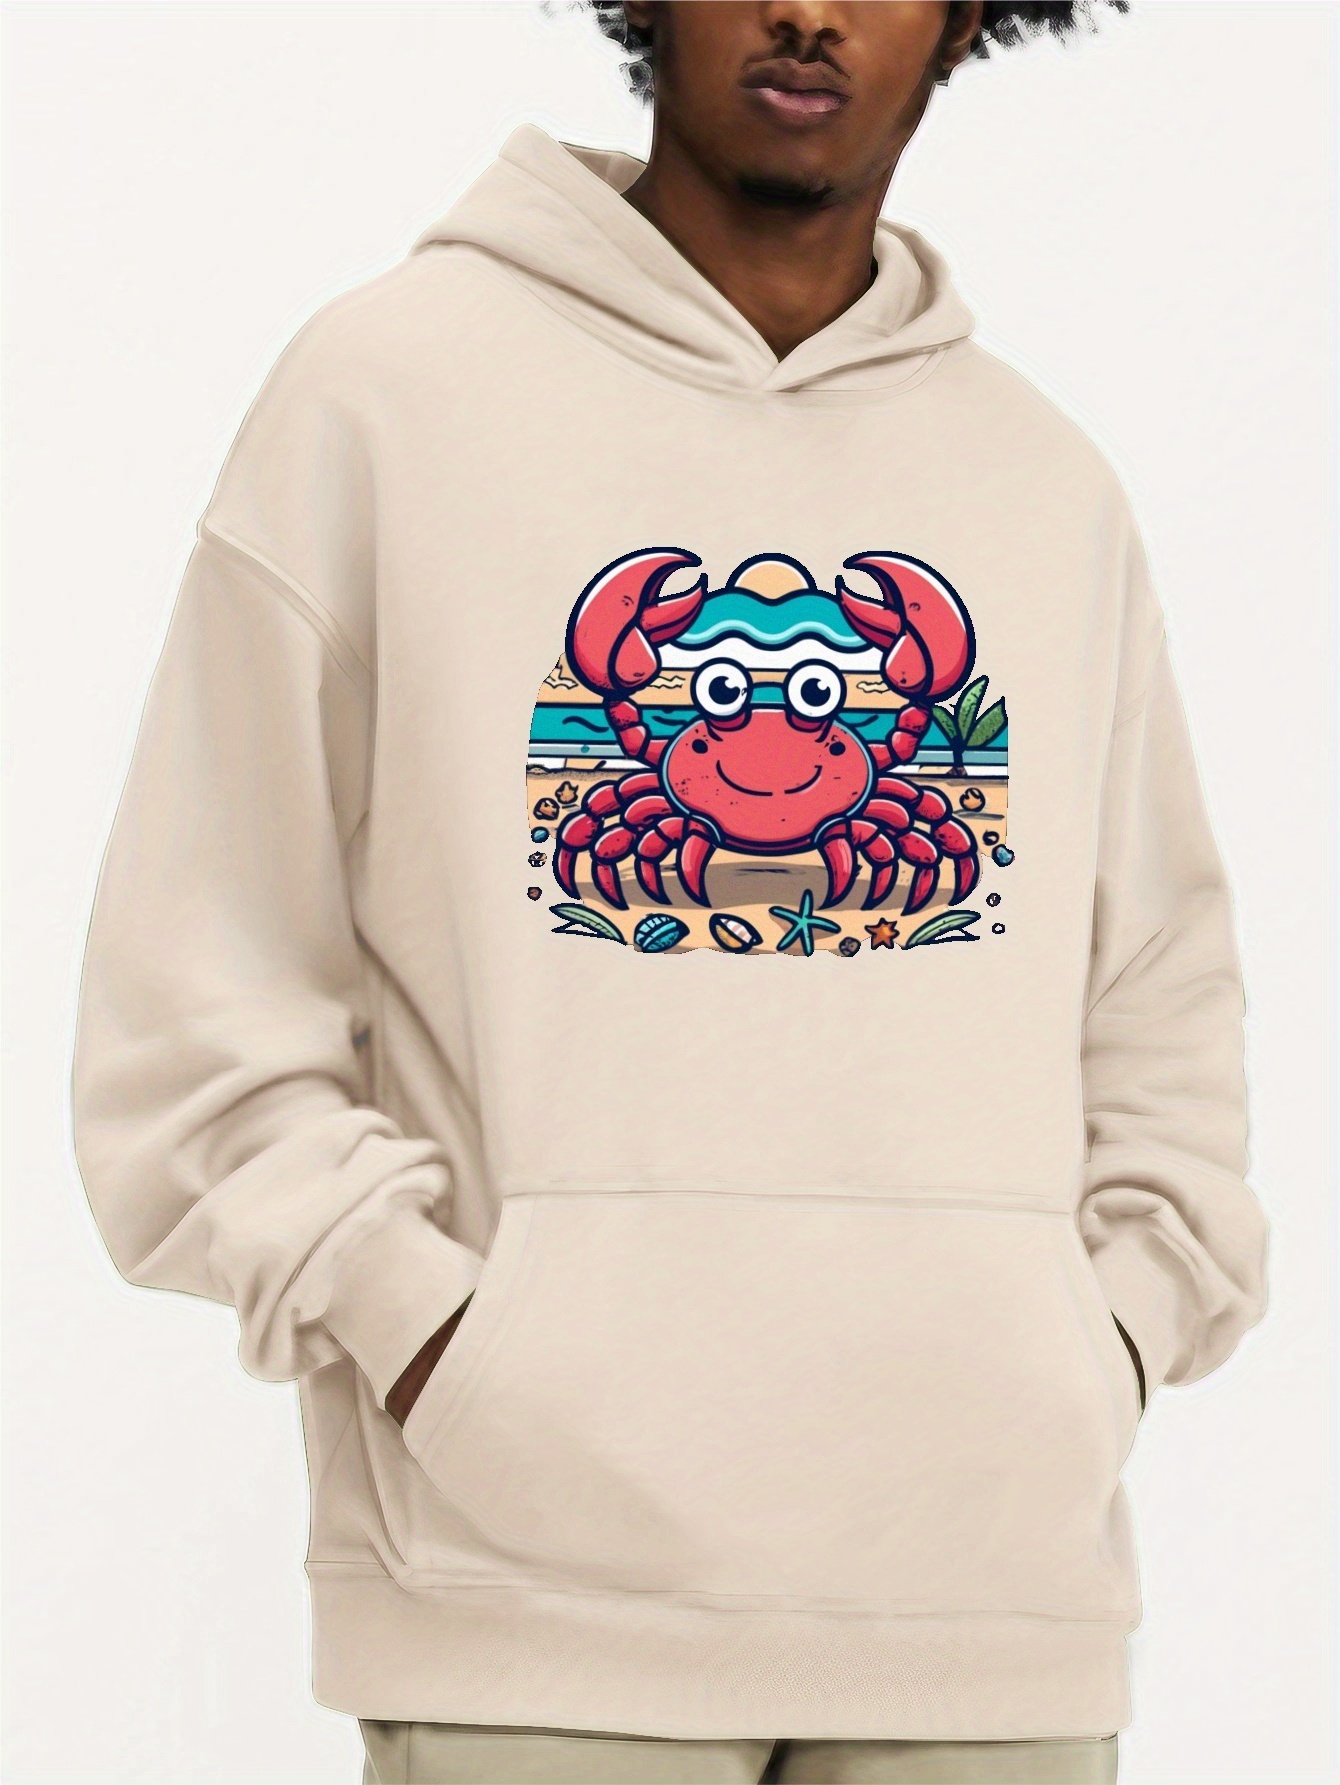 Crab On A Sunny Beach Print Hoodie For Men, Trendy Hooded Long Sleeve Top,  Men's Clothing